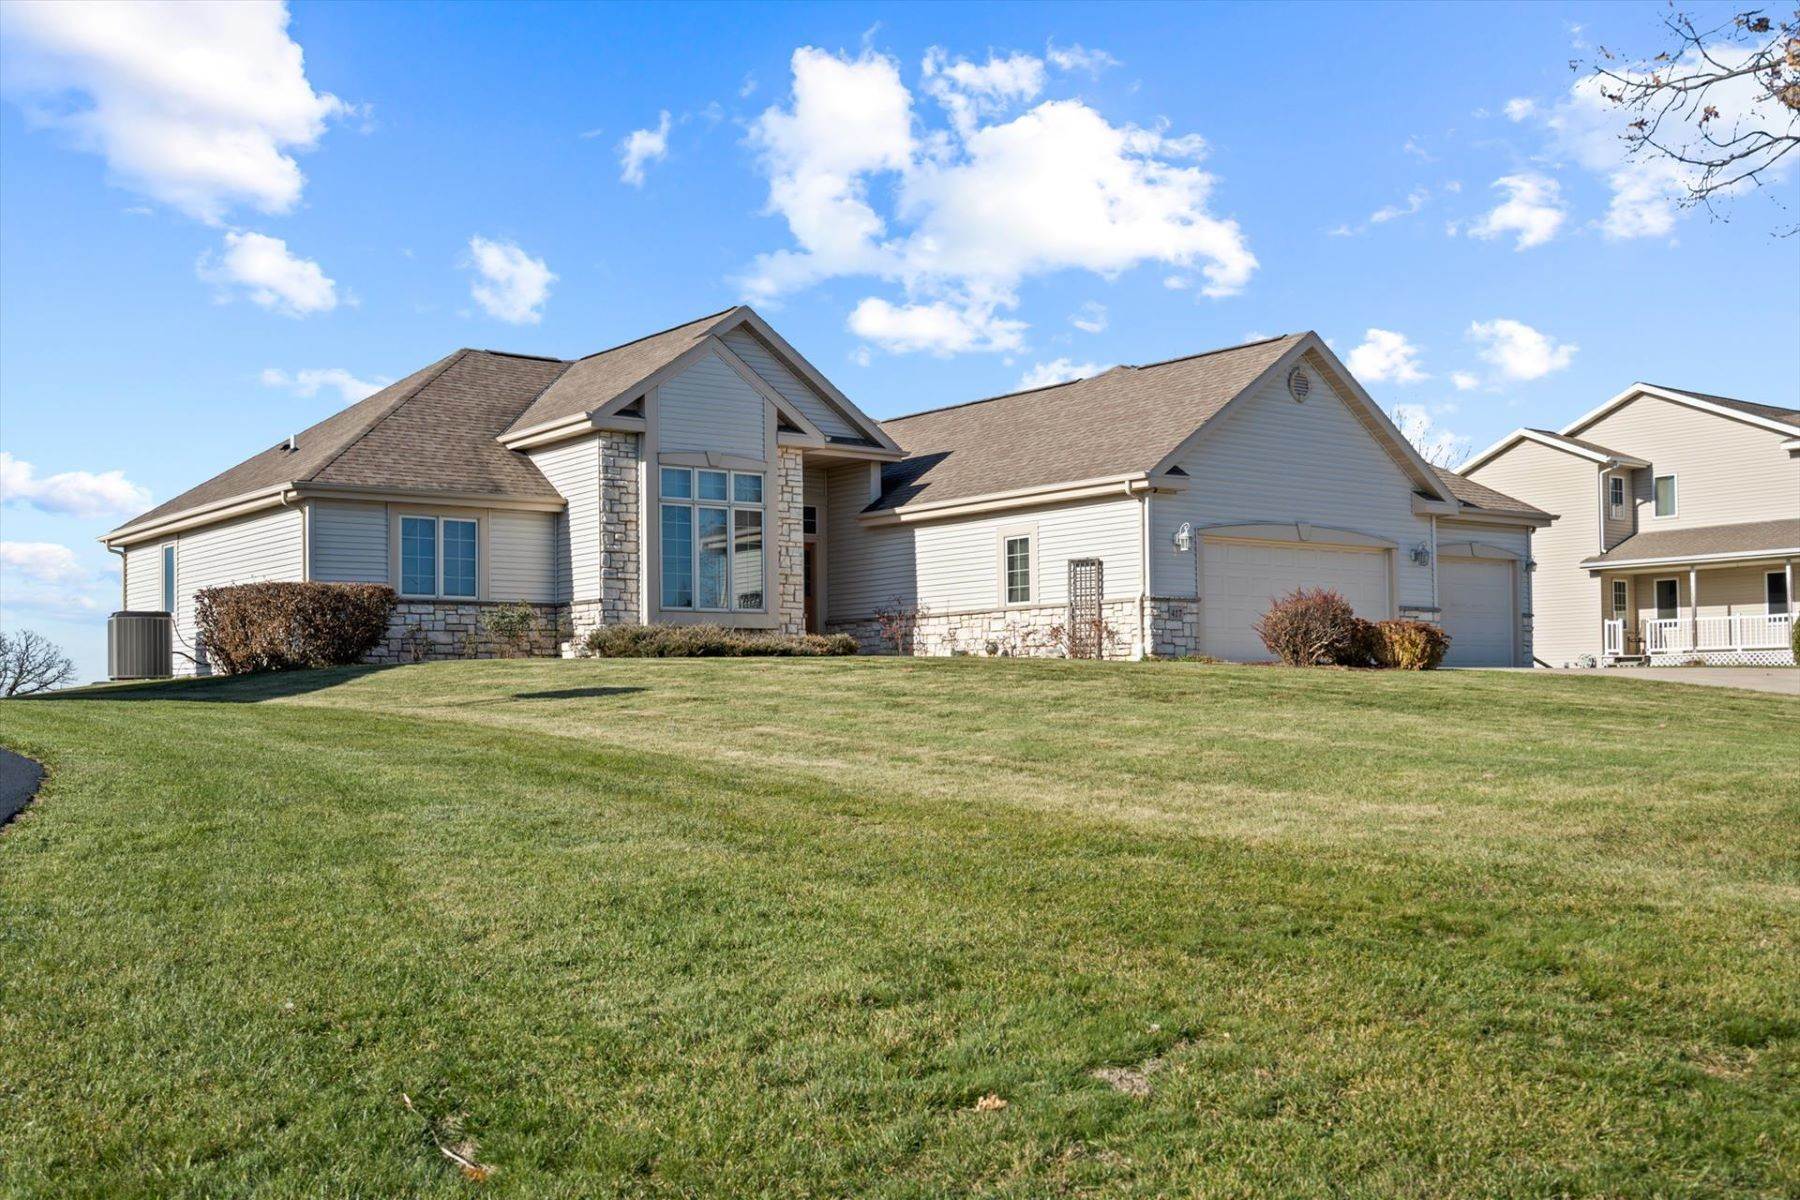 Single Family Homes for Sale at Spacious Juneau Ranch 417 N Fairfield Ave. Juneau, Wisconsin 53039 United States